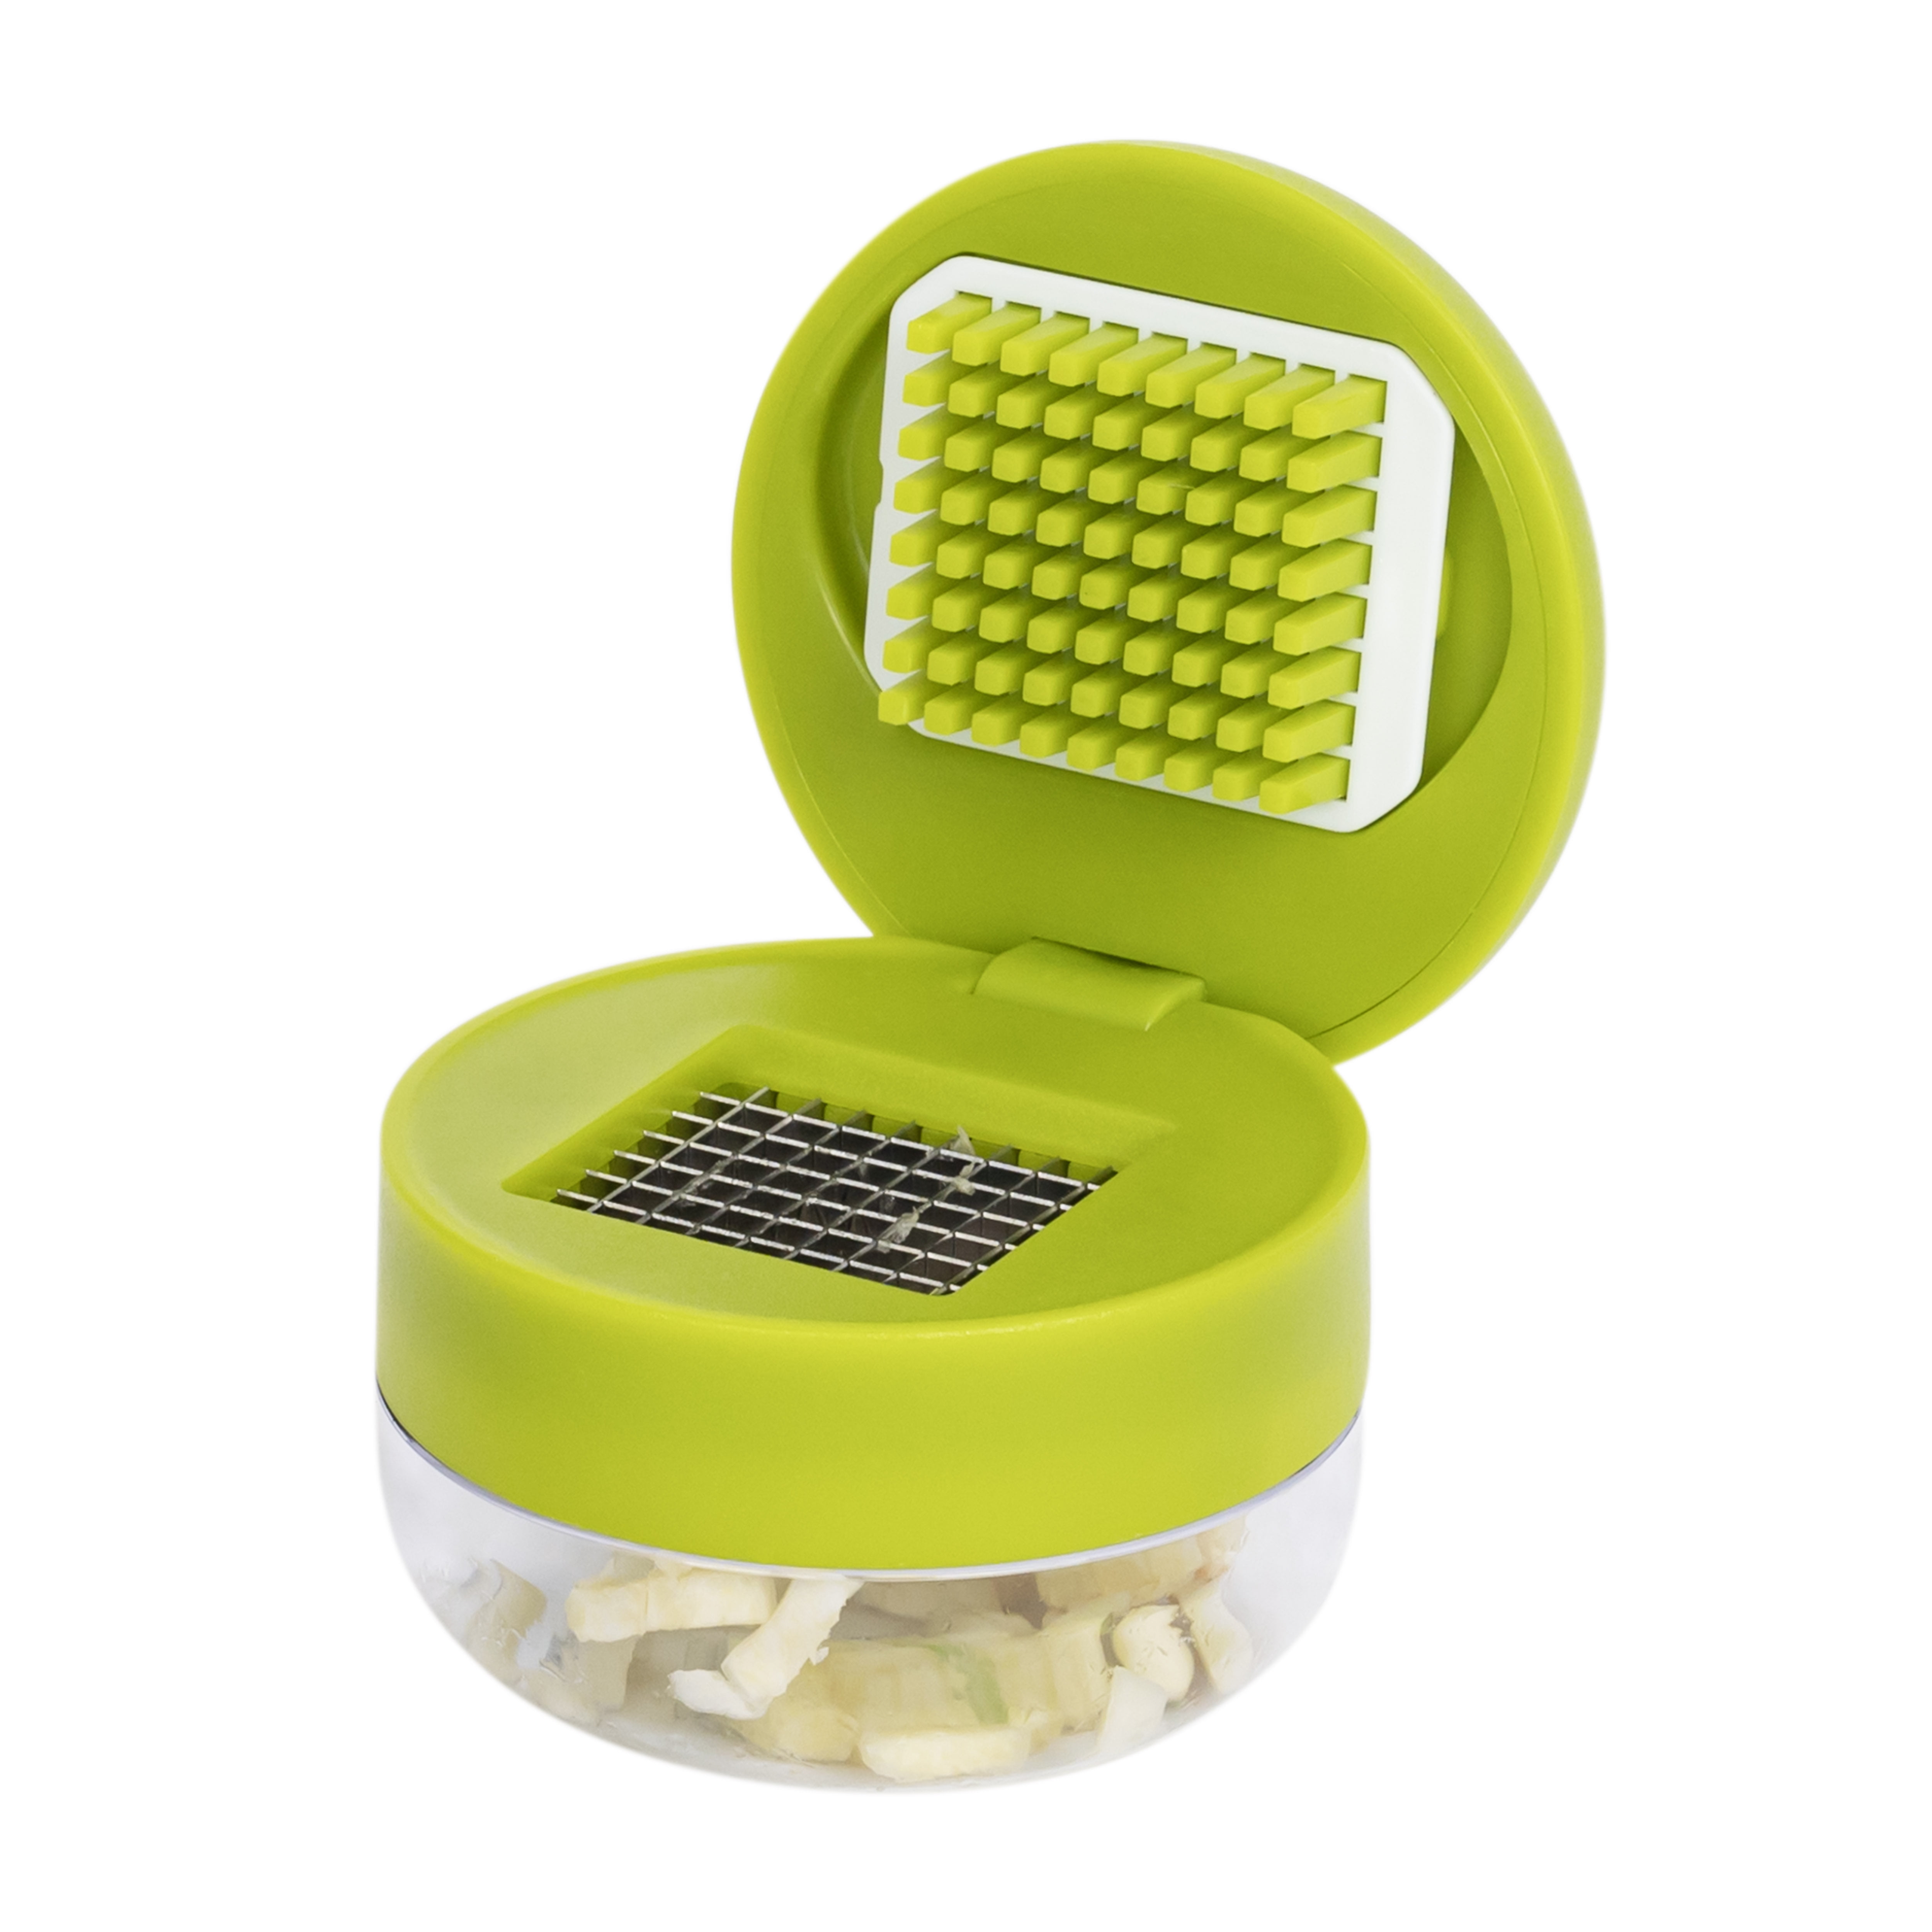 Garlic Dicer With Stainless Steel Bladesconvenient And Fast Compactgreen